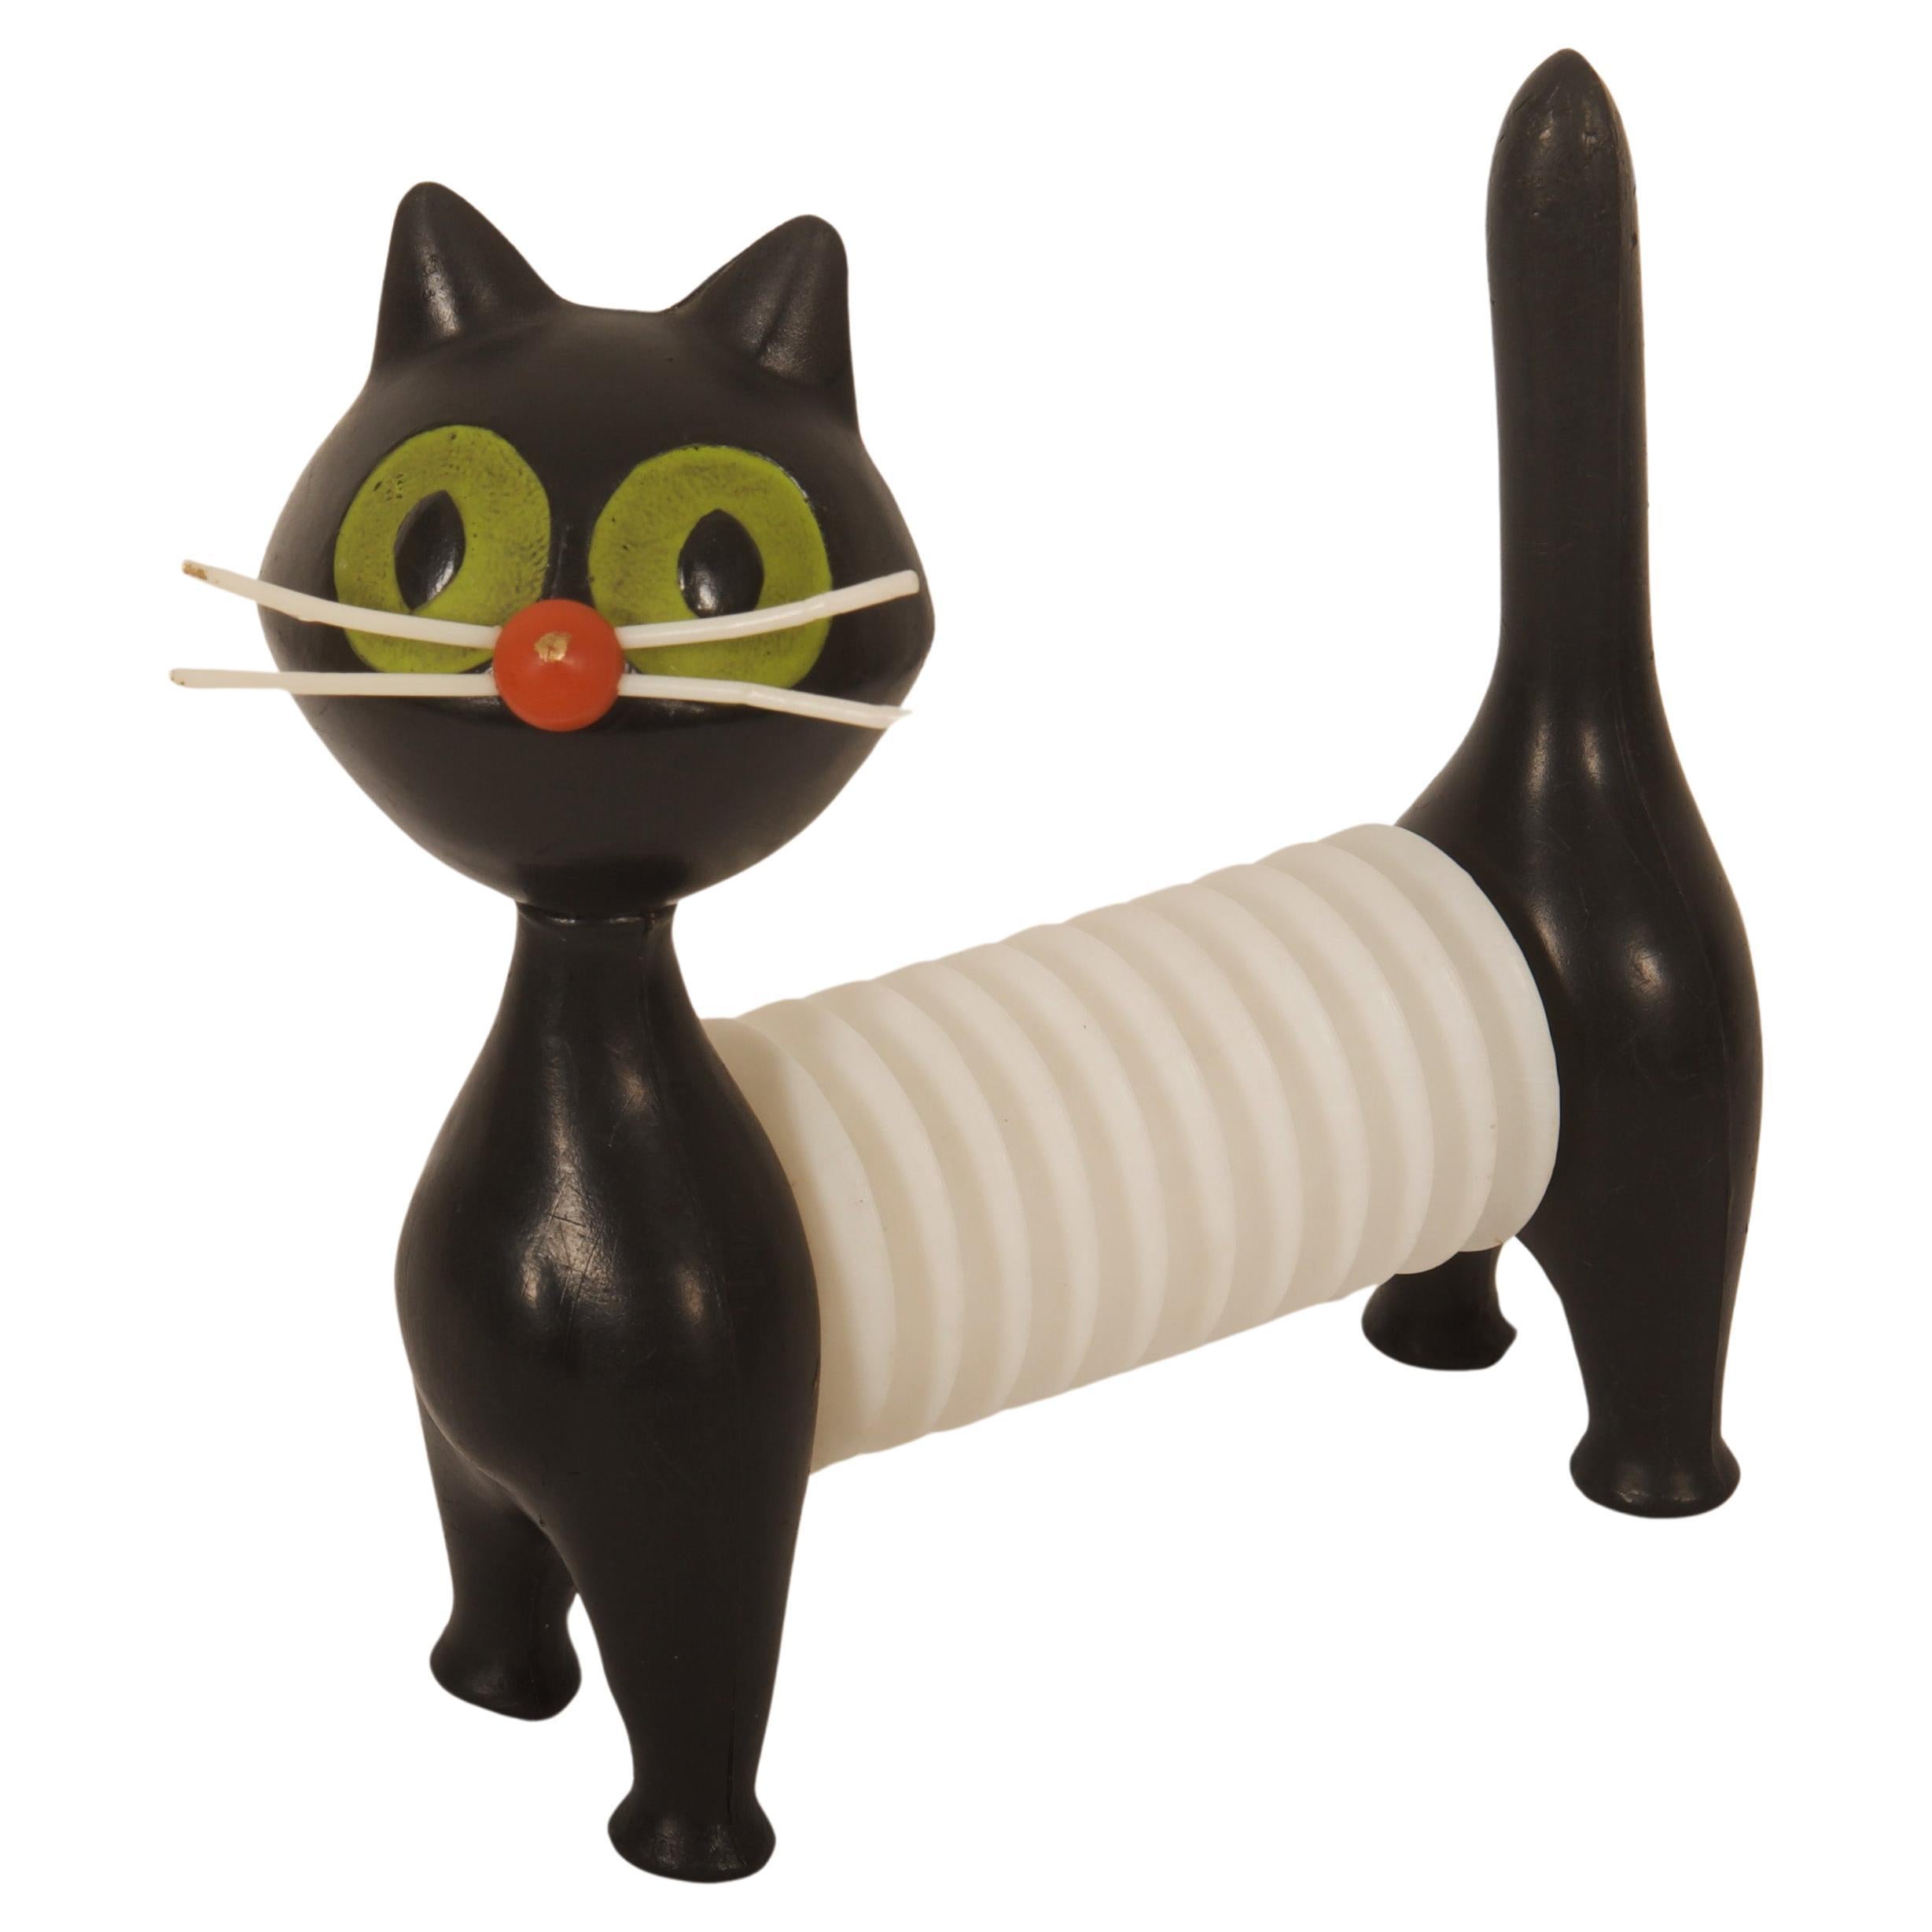 Accordion Squeaky Toy „Tomcat“ by Libuse Niklova for Fatra For Sale